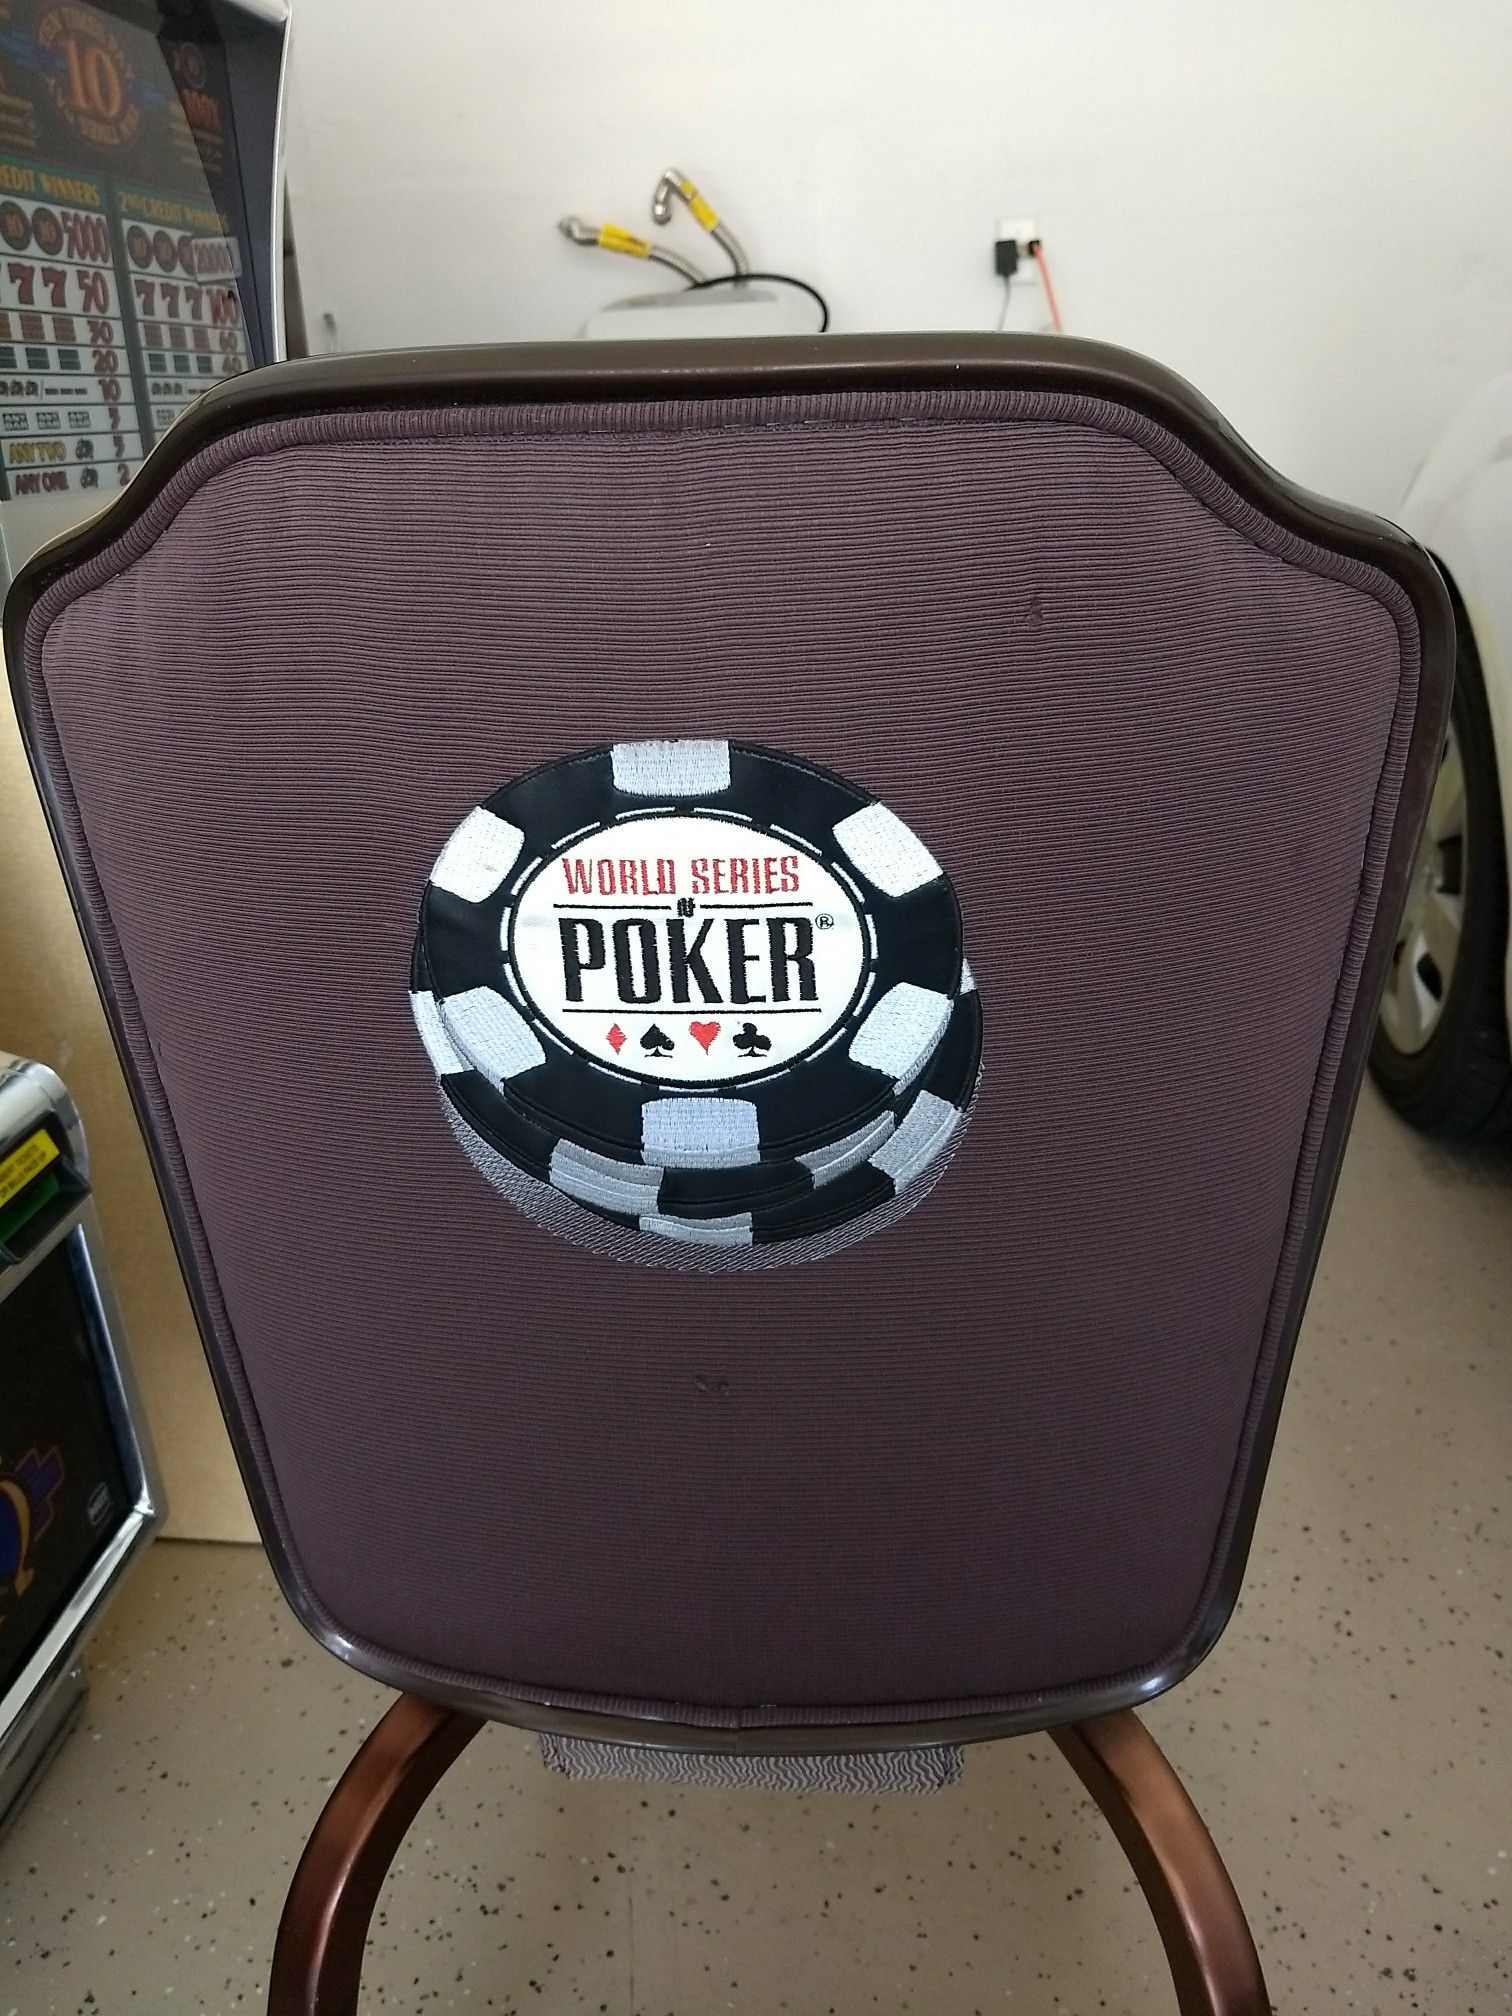 Poker chairs from wsop